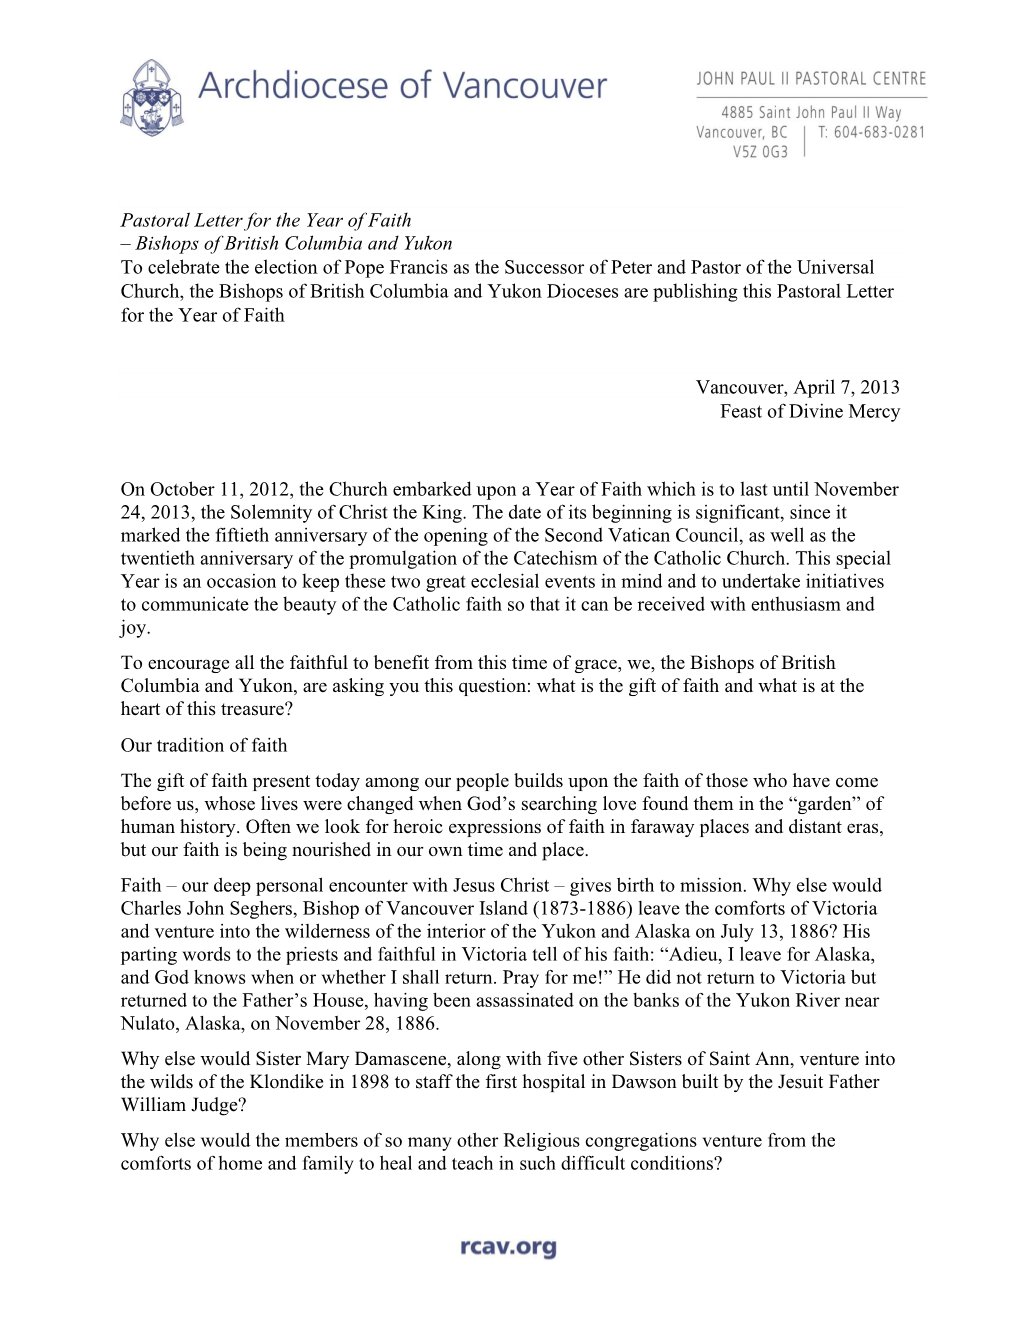 Pastoral Letter for the Year of Faith – Bishops of British Columbia and Yukon to Celebrate the Election of Pope Francis As